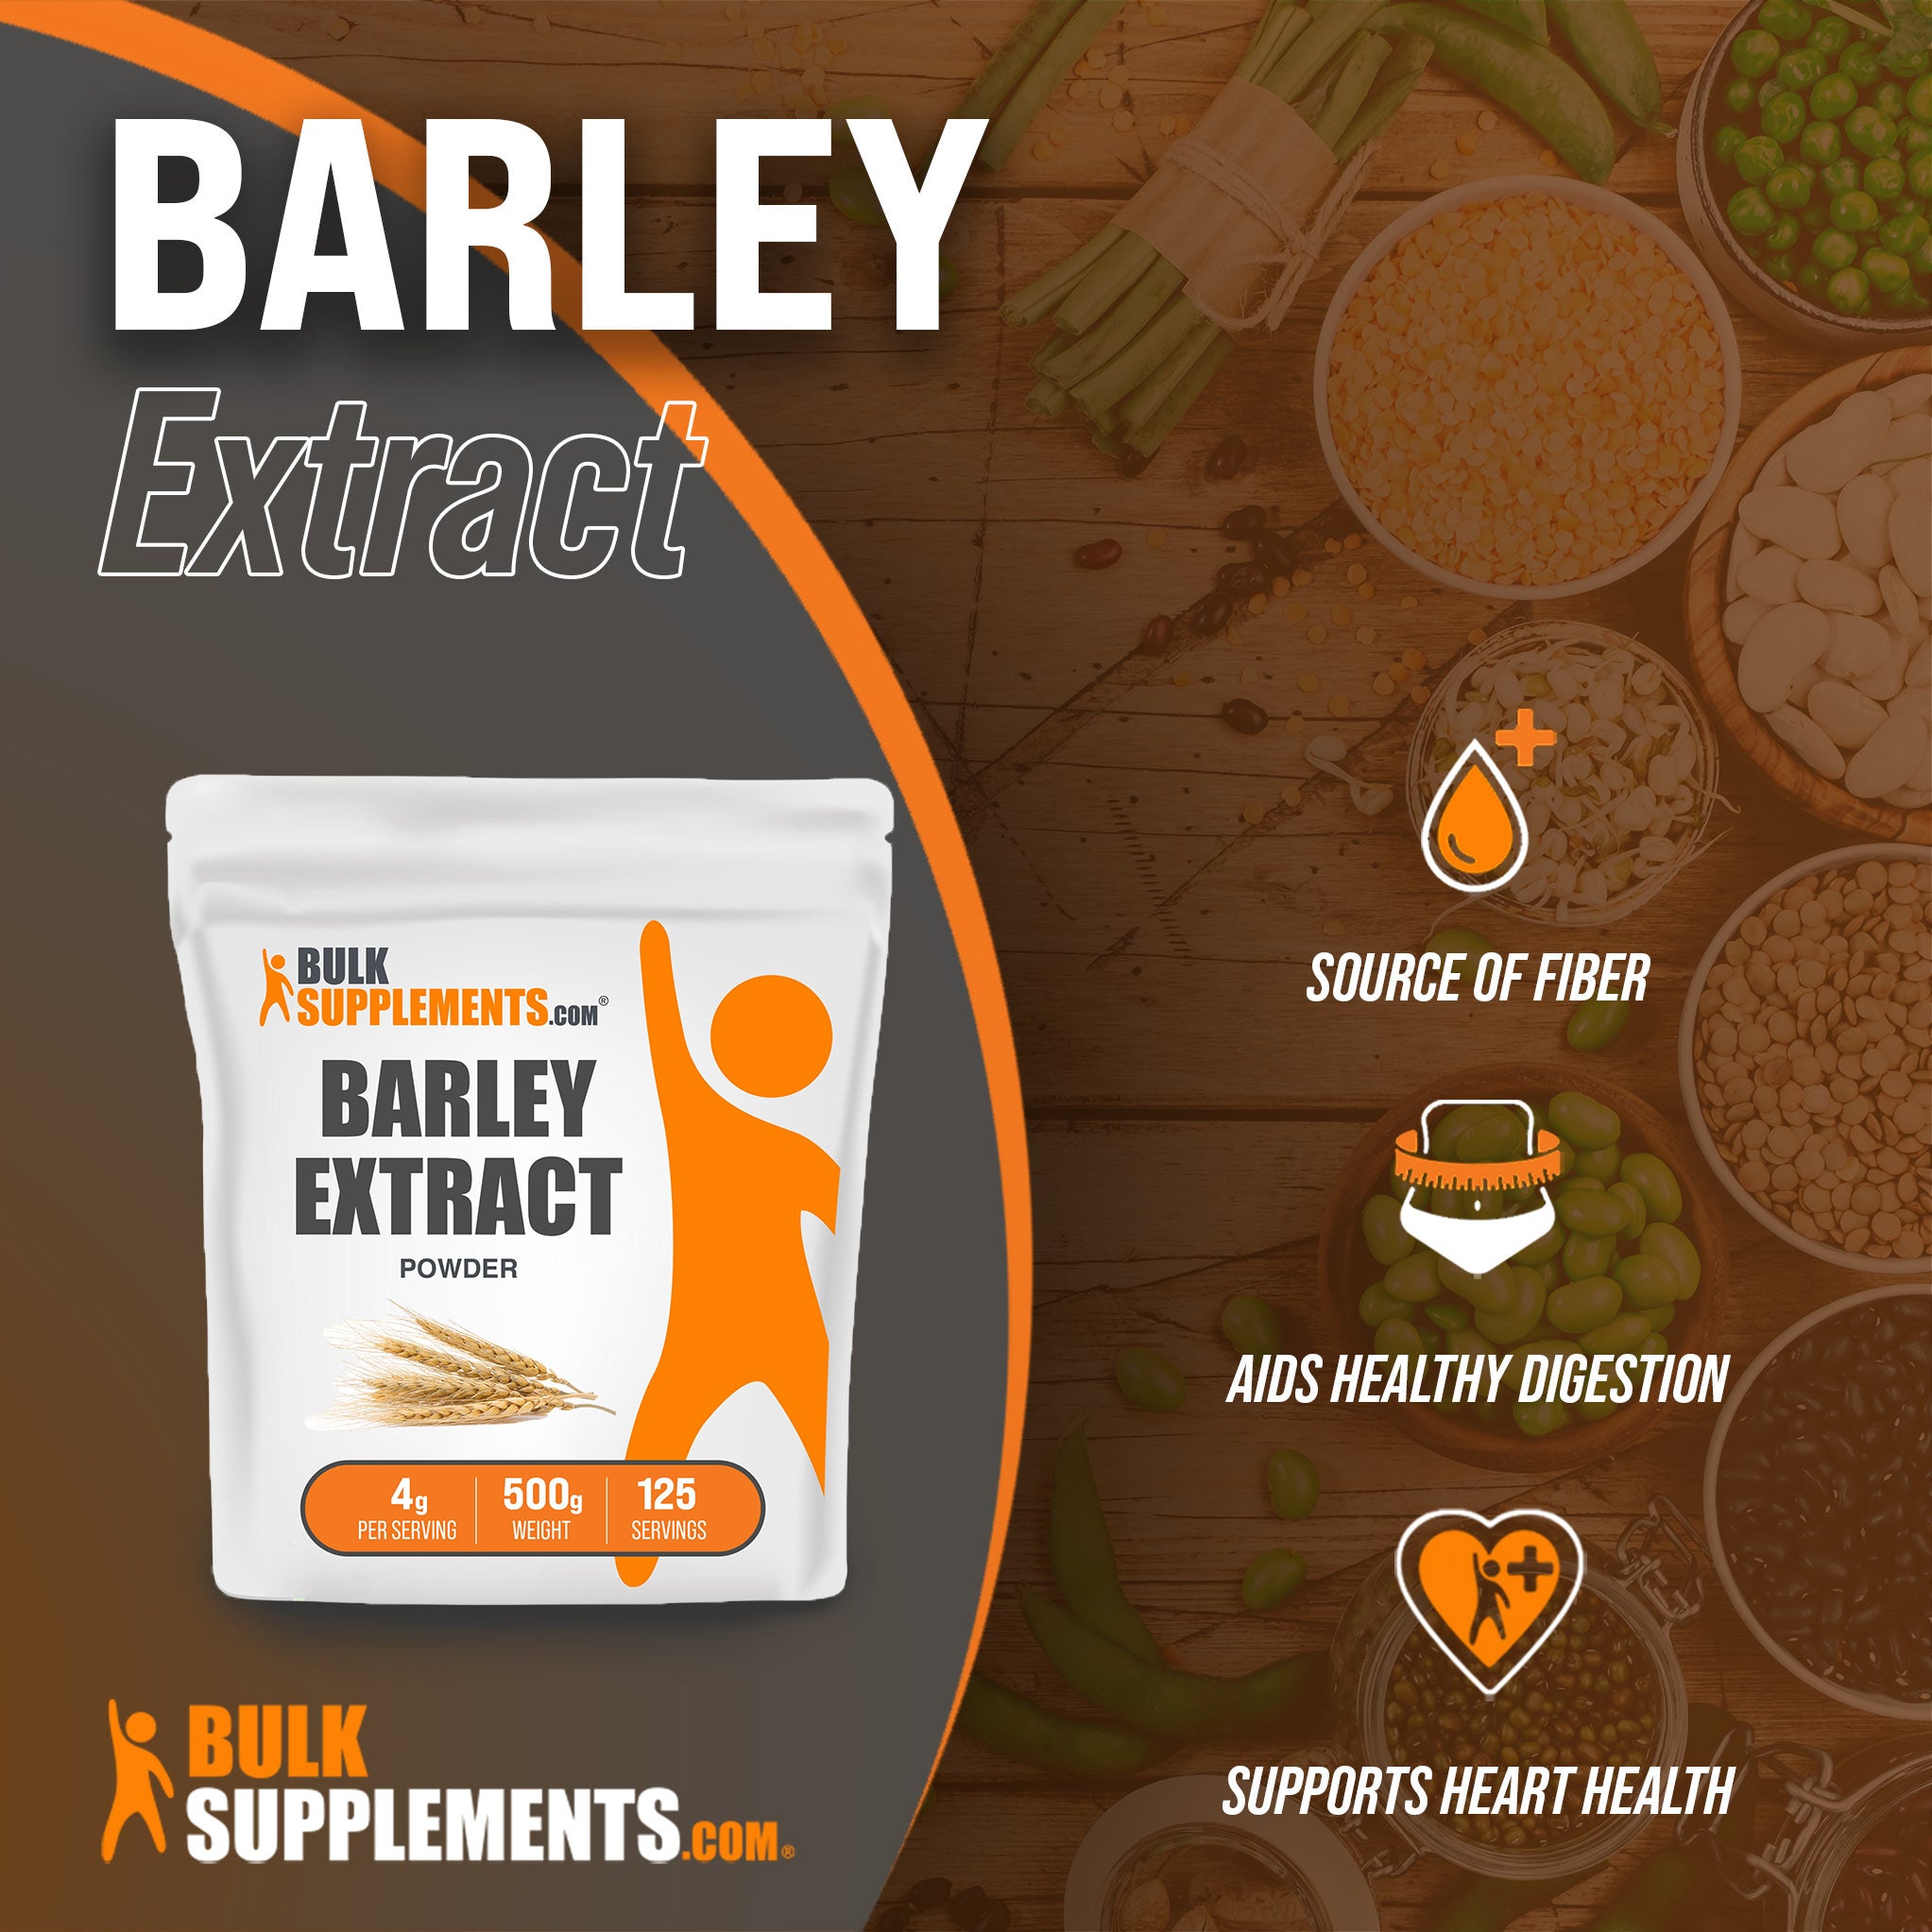 Barley Extract from Bulk Supplements for a great source of fiber